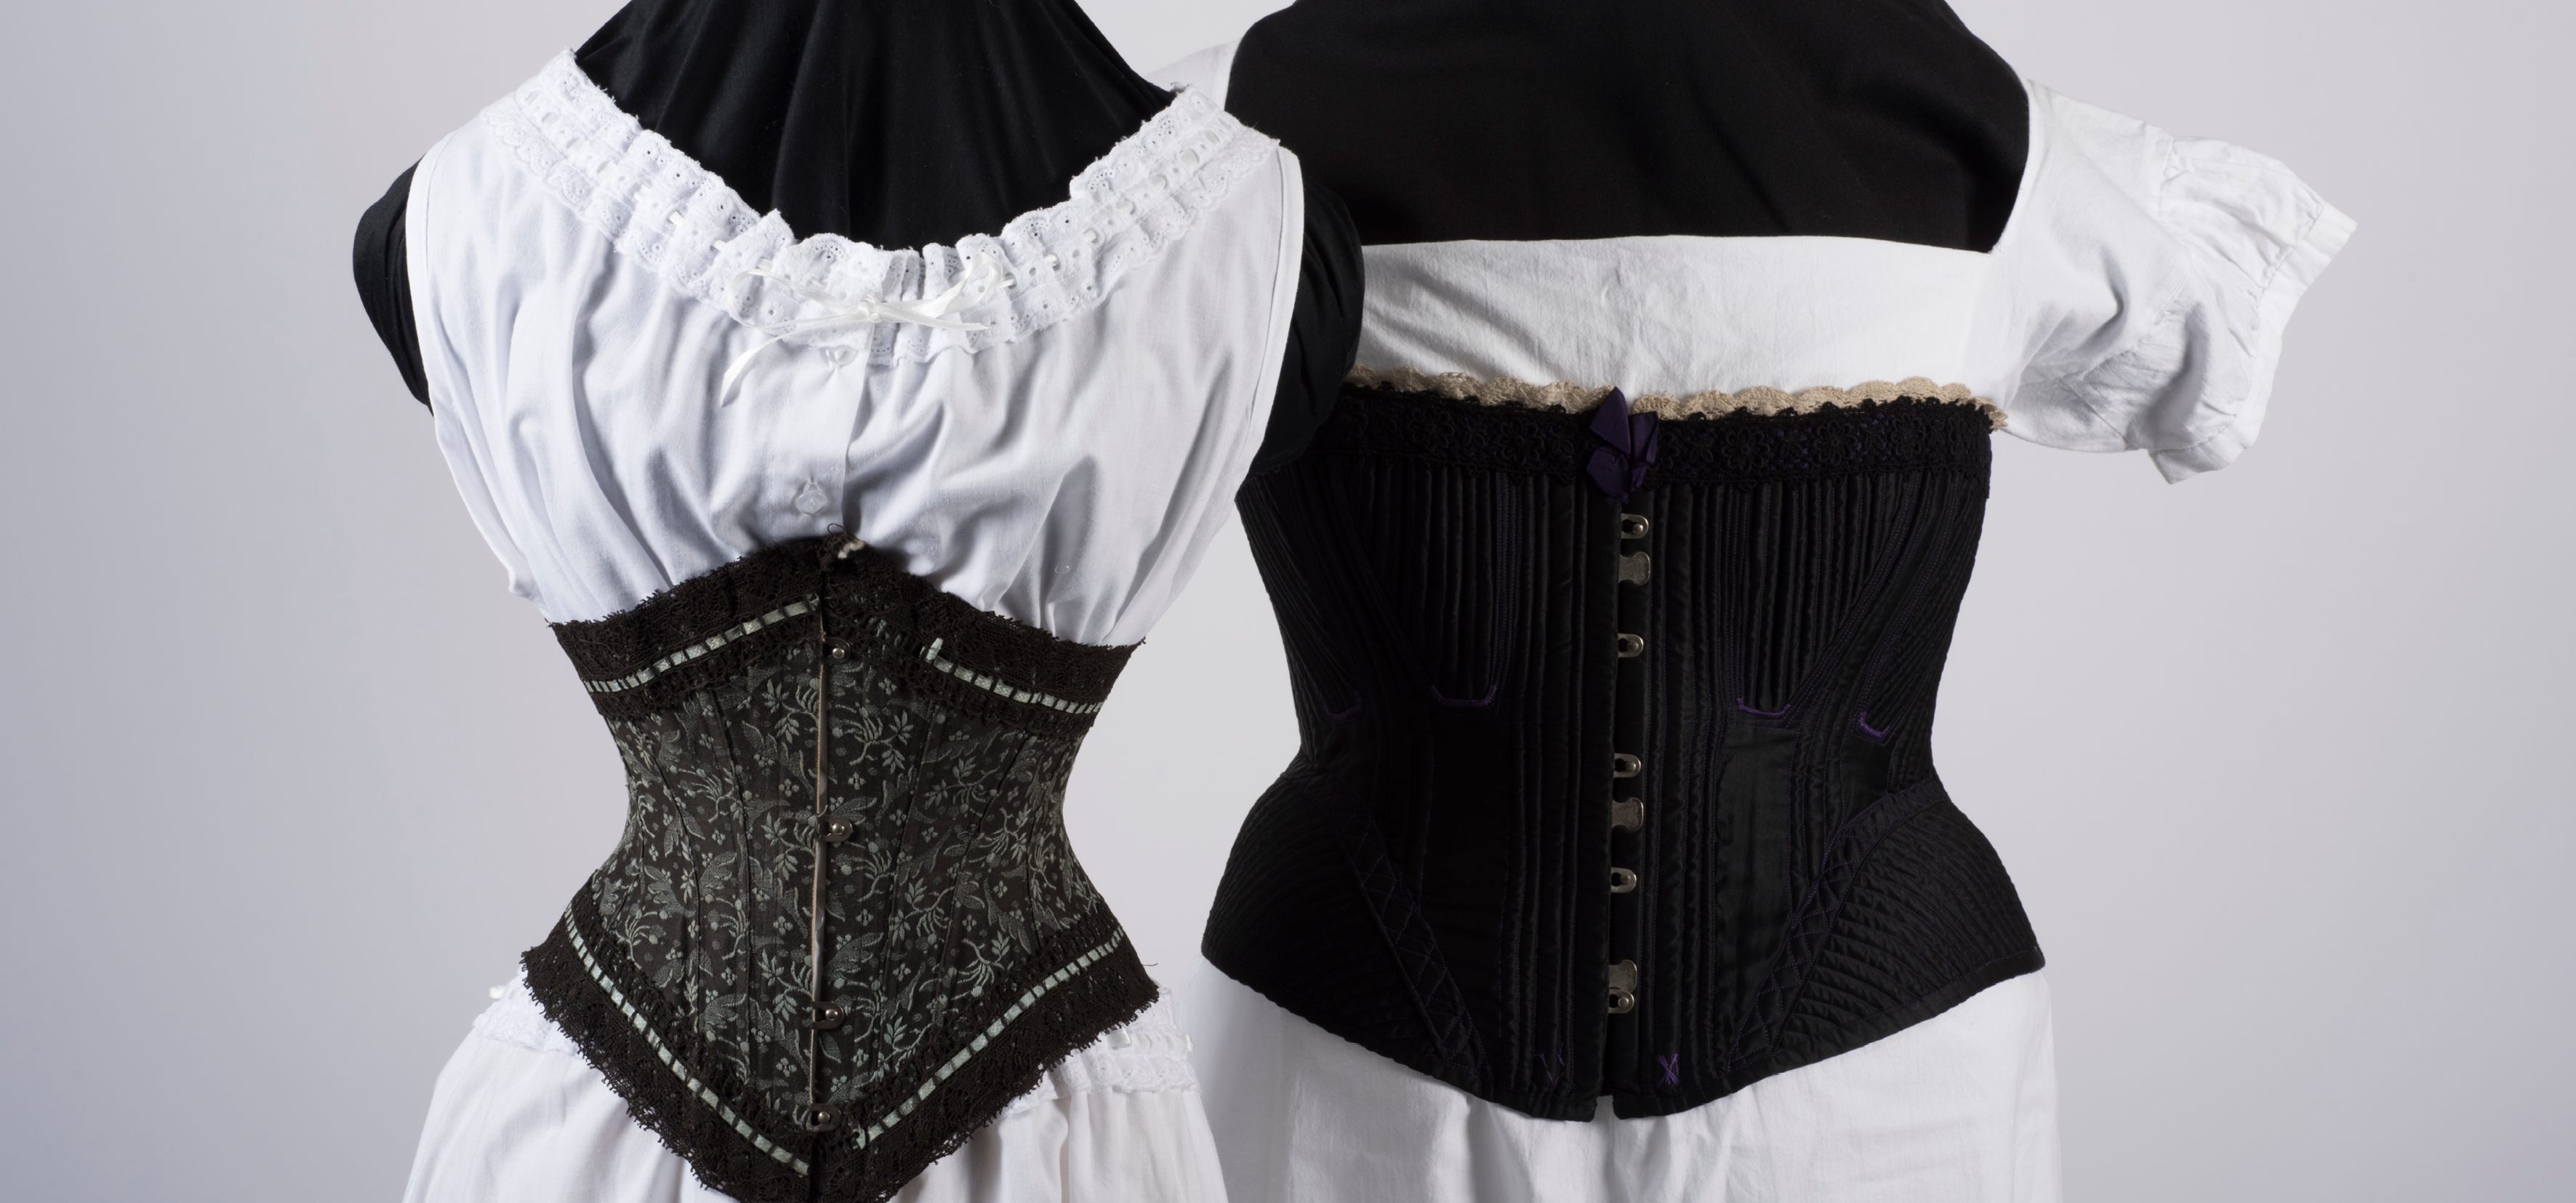 Ten true corset facts that will blow your mind! – Museum Clickbait